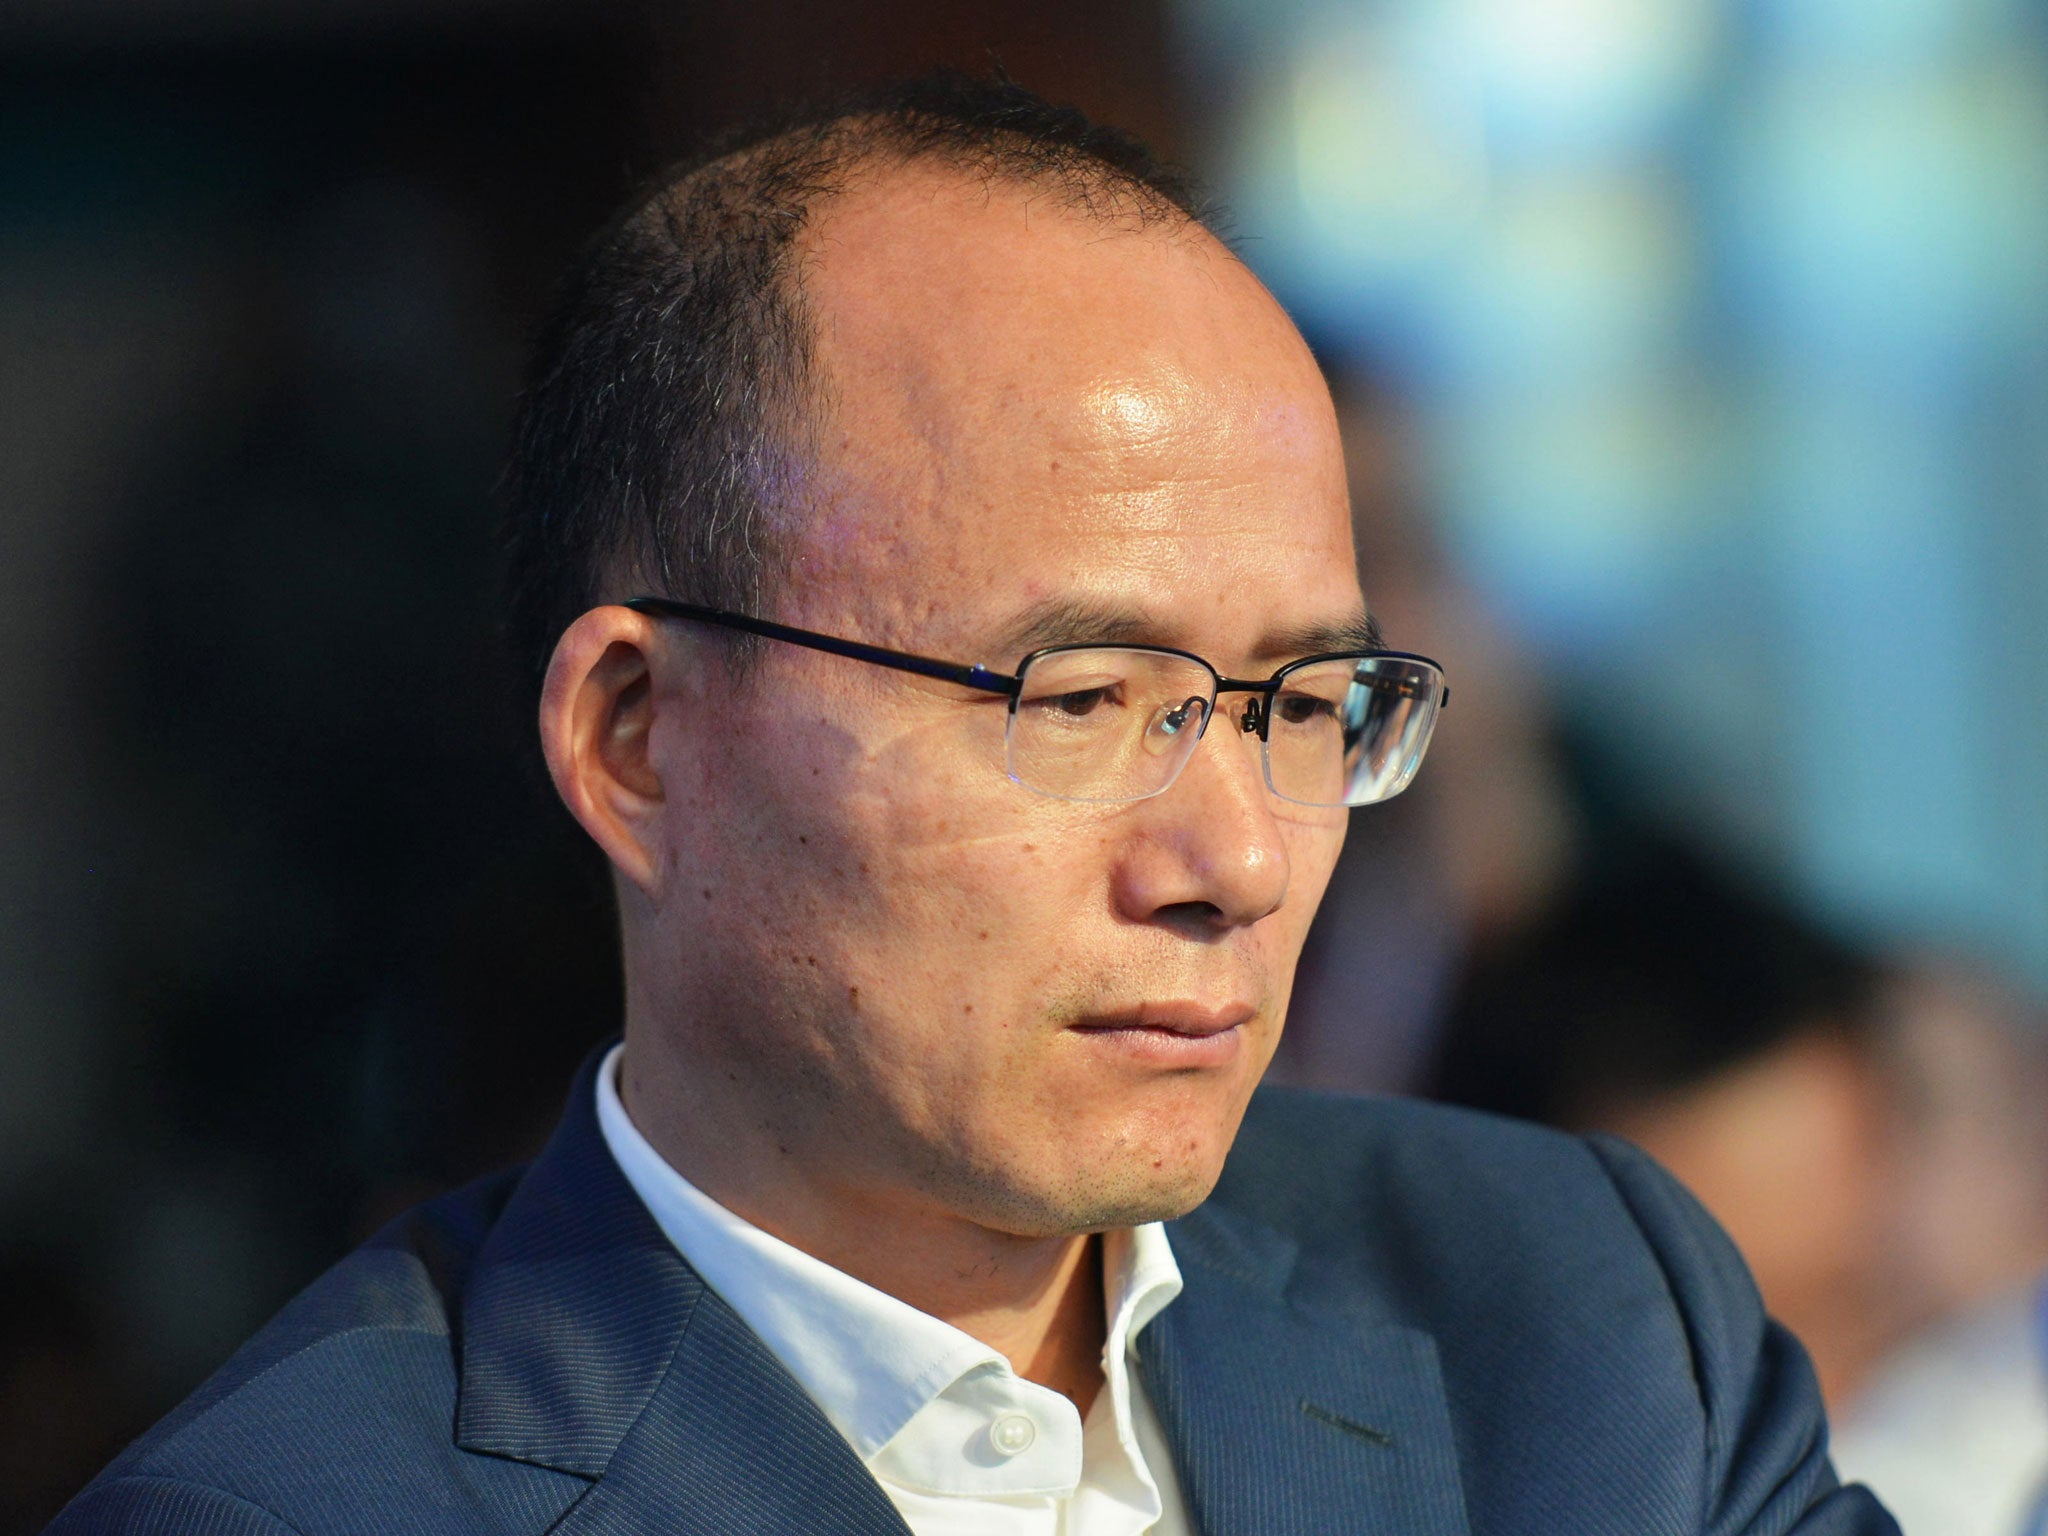 This photo taken on June 25, 2015 shows Guo Guangchang, the chairman of one of China's biggest private-sector conglomerates, Club Med owner Fosun, attending a conference in Hangzhou, in eastern China's Zhejiang province. Fosun said on December 11, 2015 its chairman Guo Guangchang was cooperating with judicial authorities over a reported corruption investigation